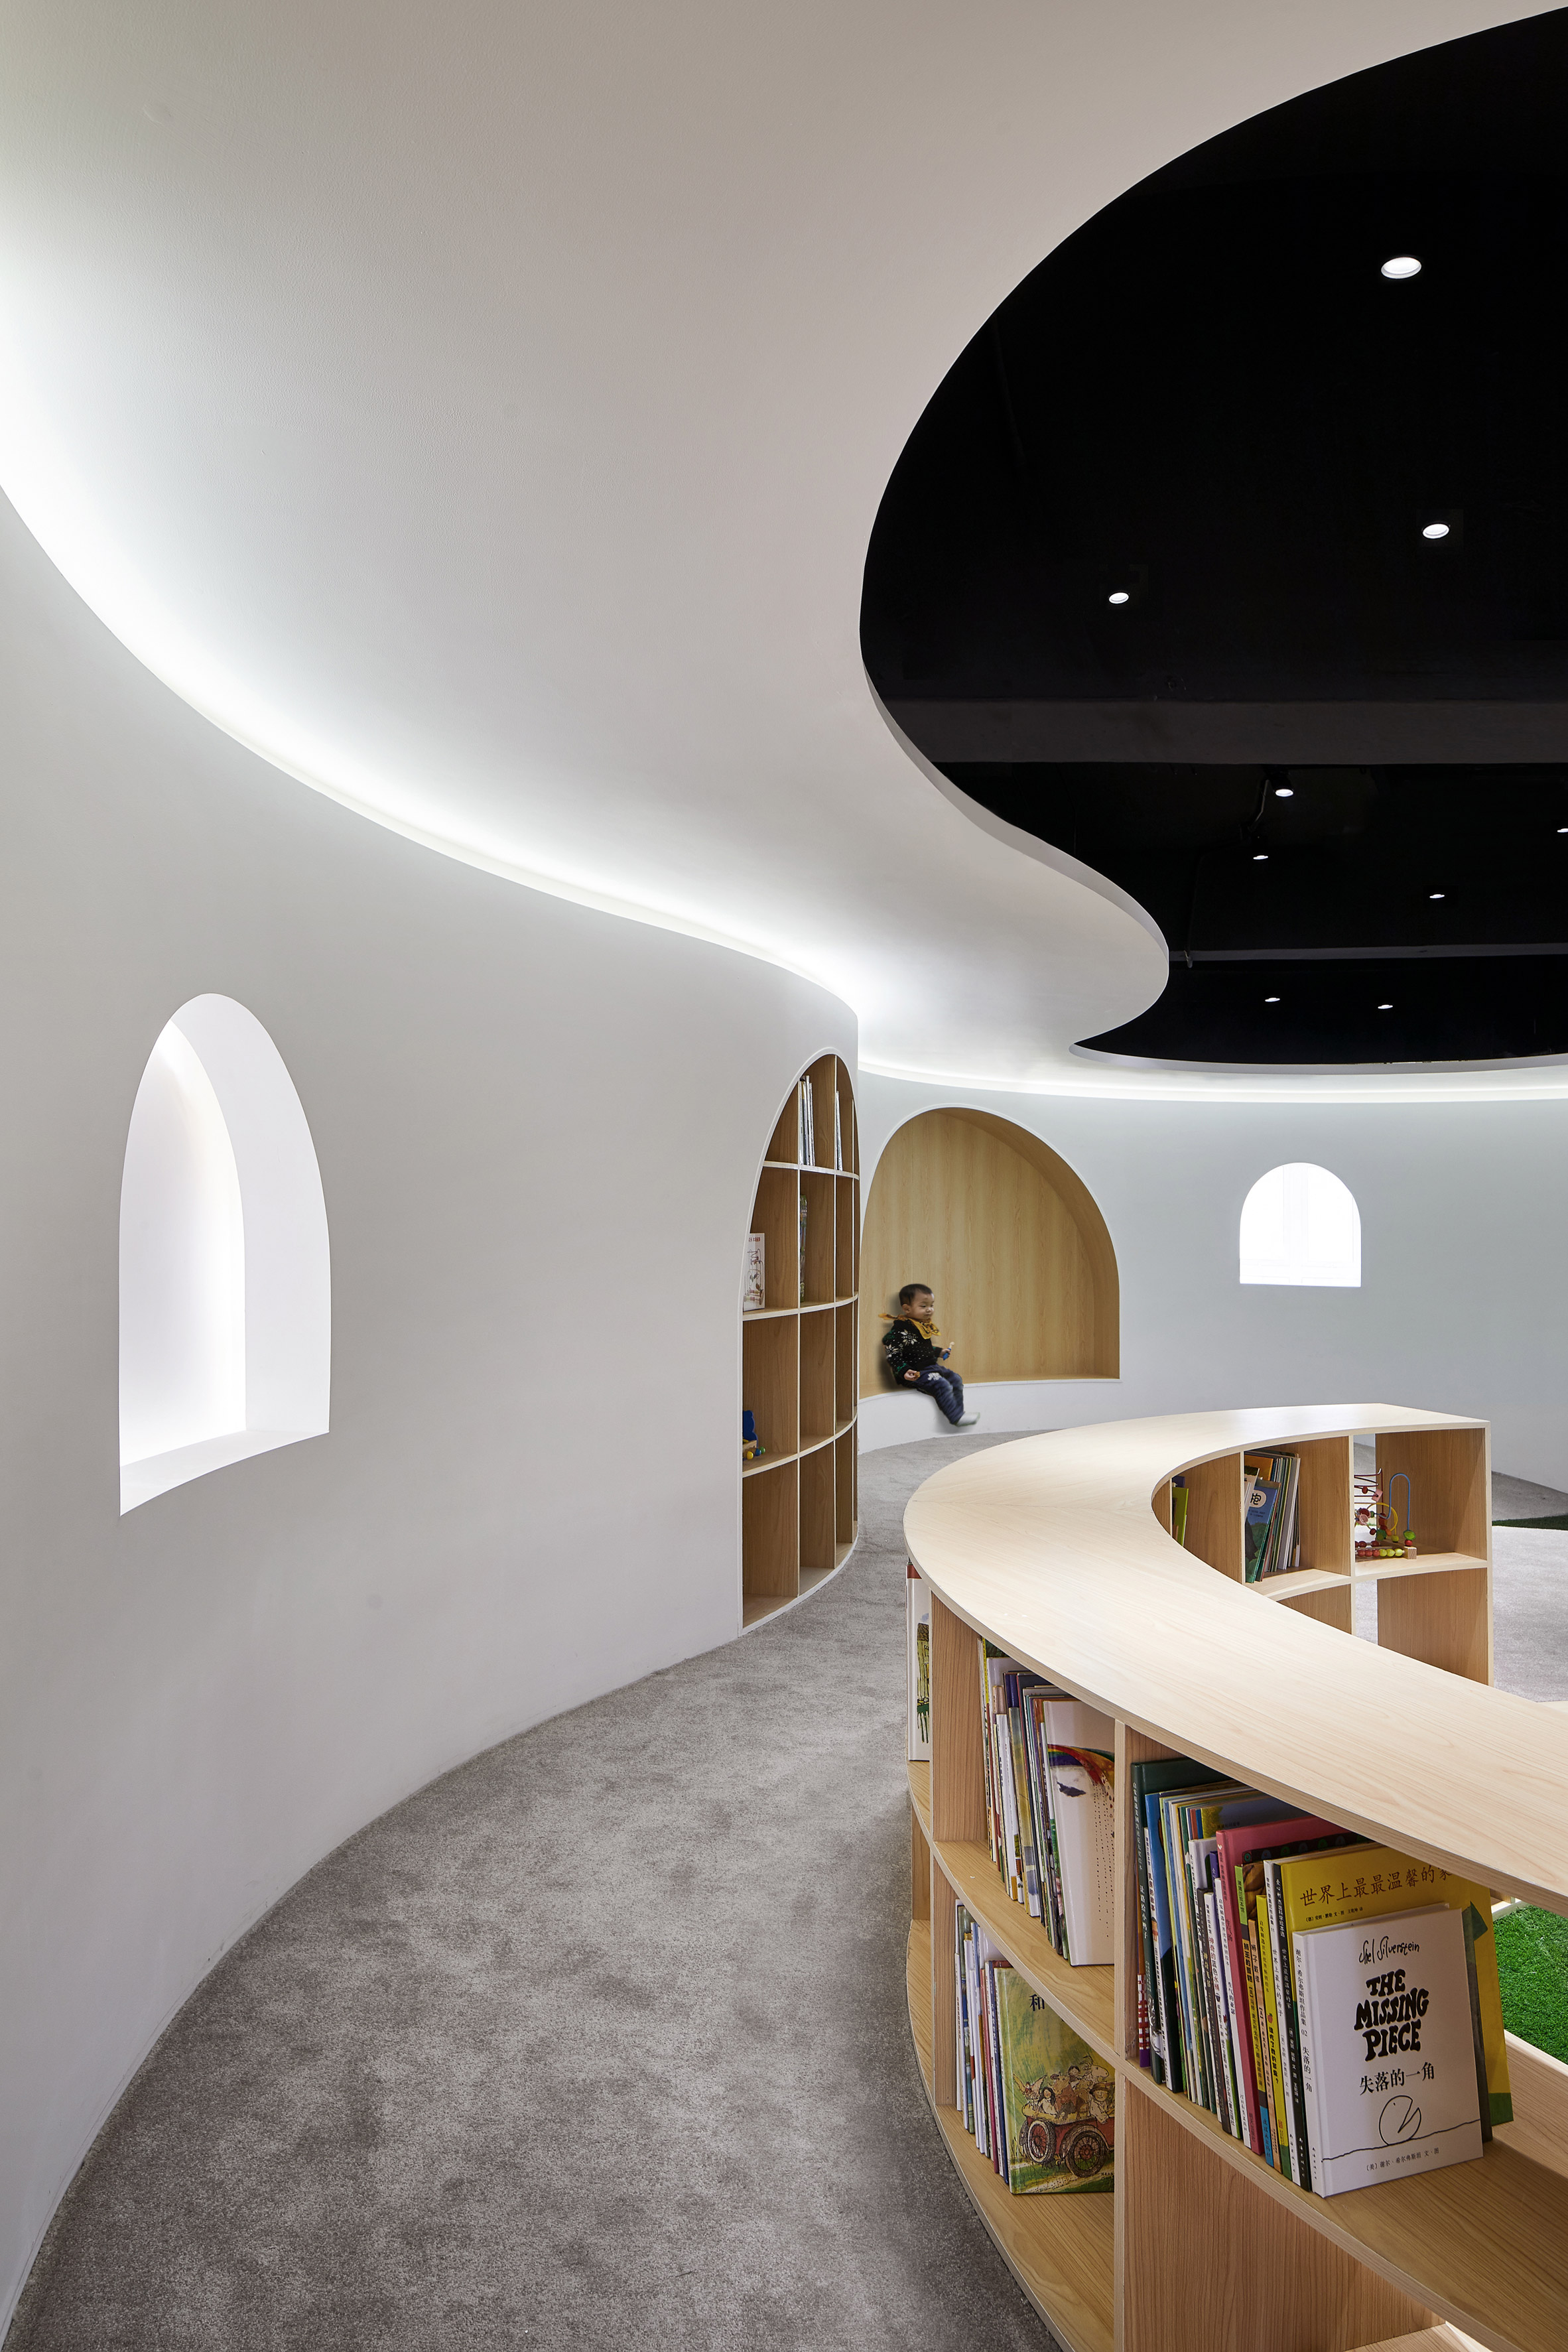 Curving wood-lined nooks create private reading spaces in Shanghai children's library